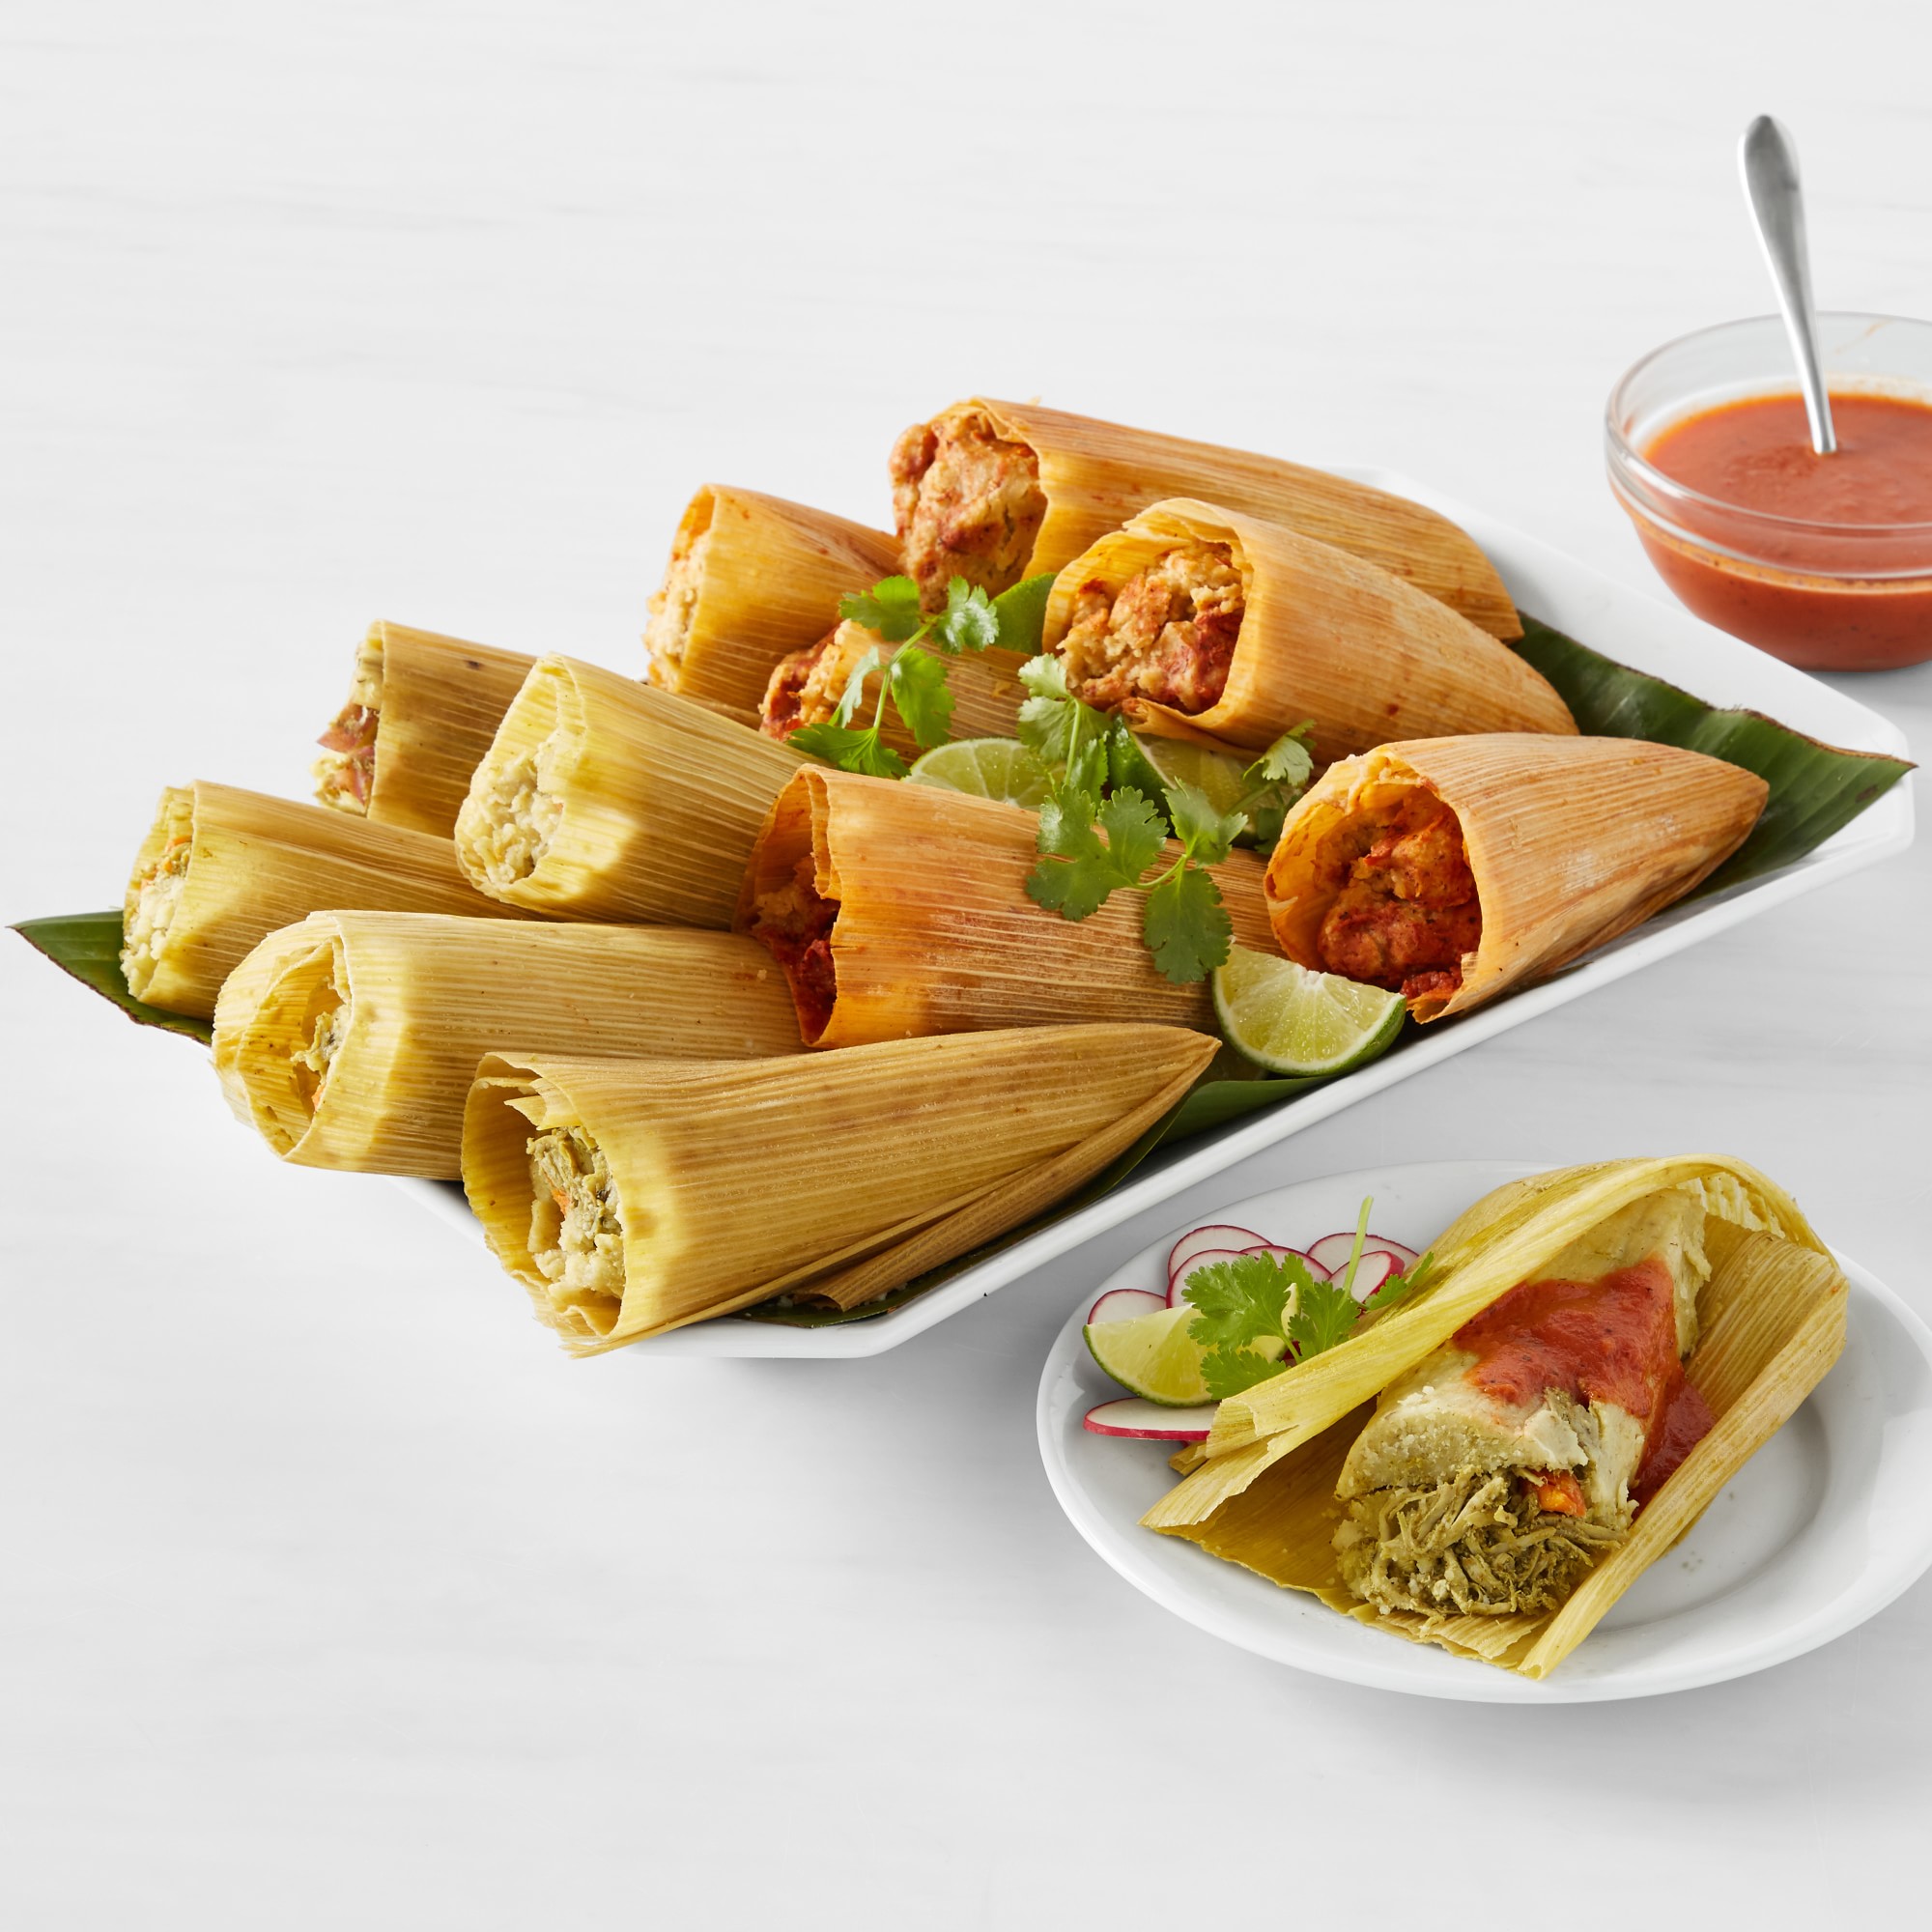 Pork and Chicken Tamales with Salsa, Set of 12